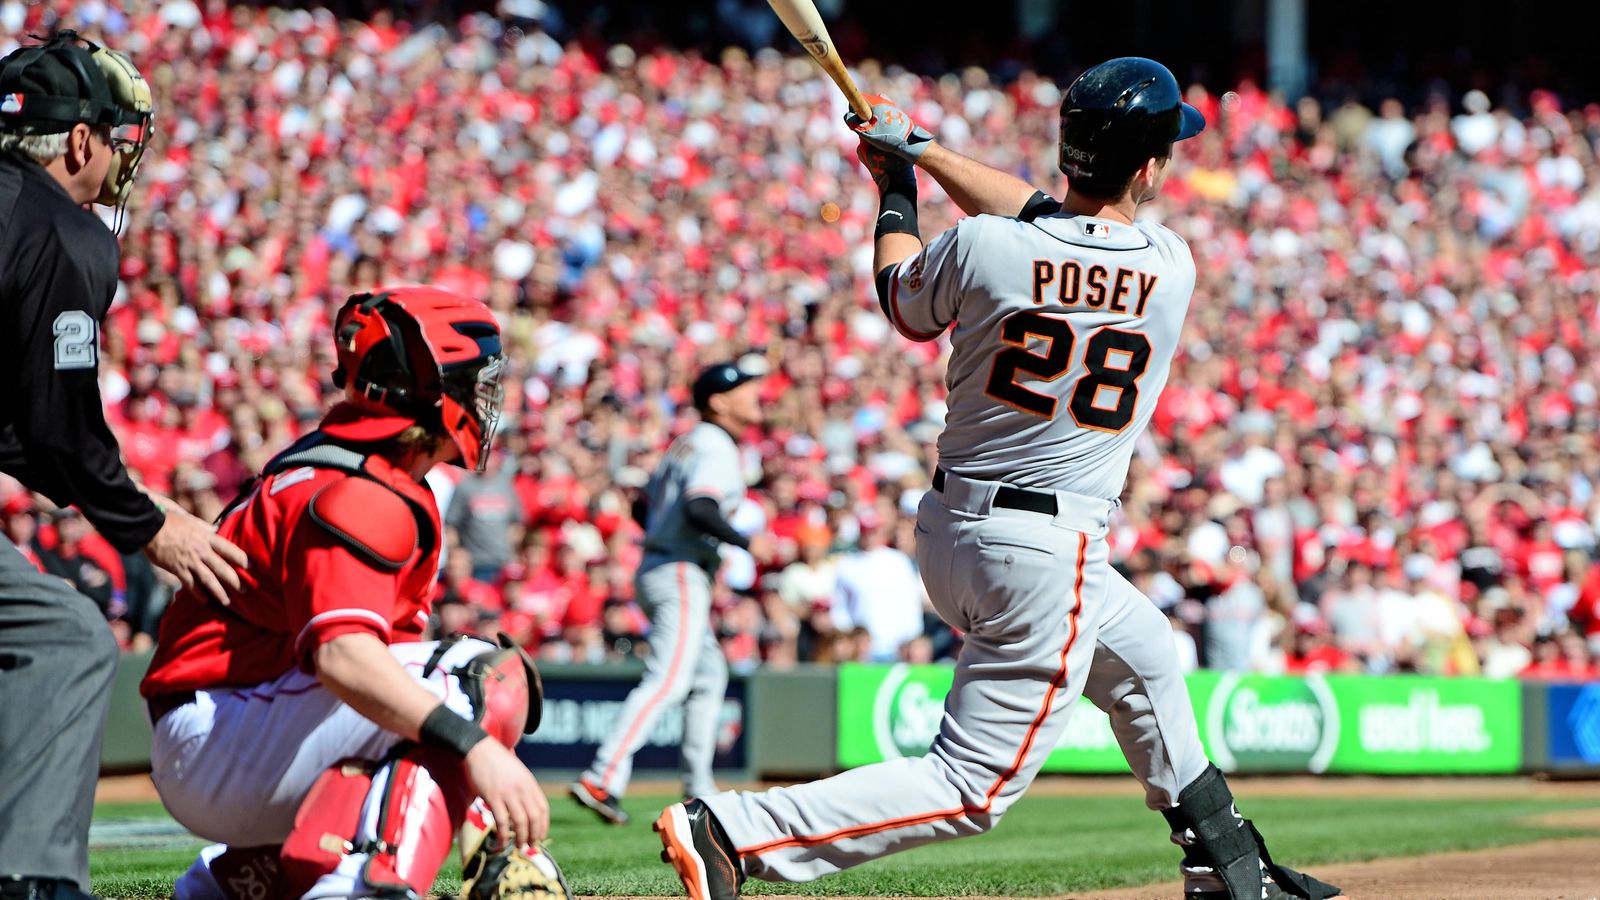 I need to get a thread up, so let's watch the Buster Posey grand slam....